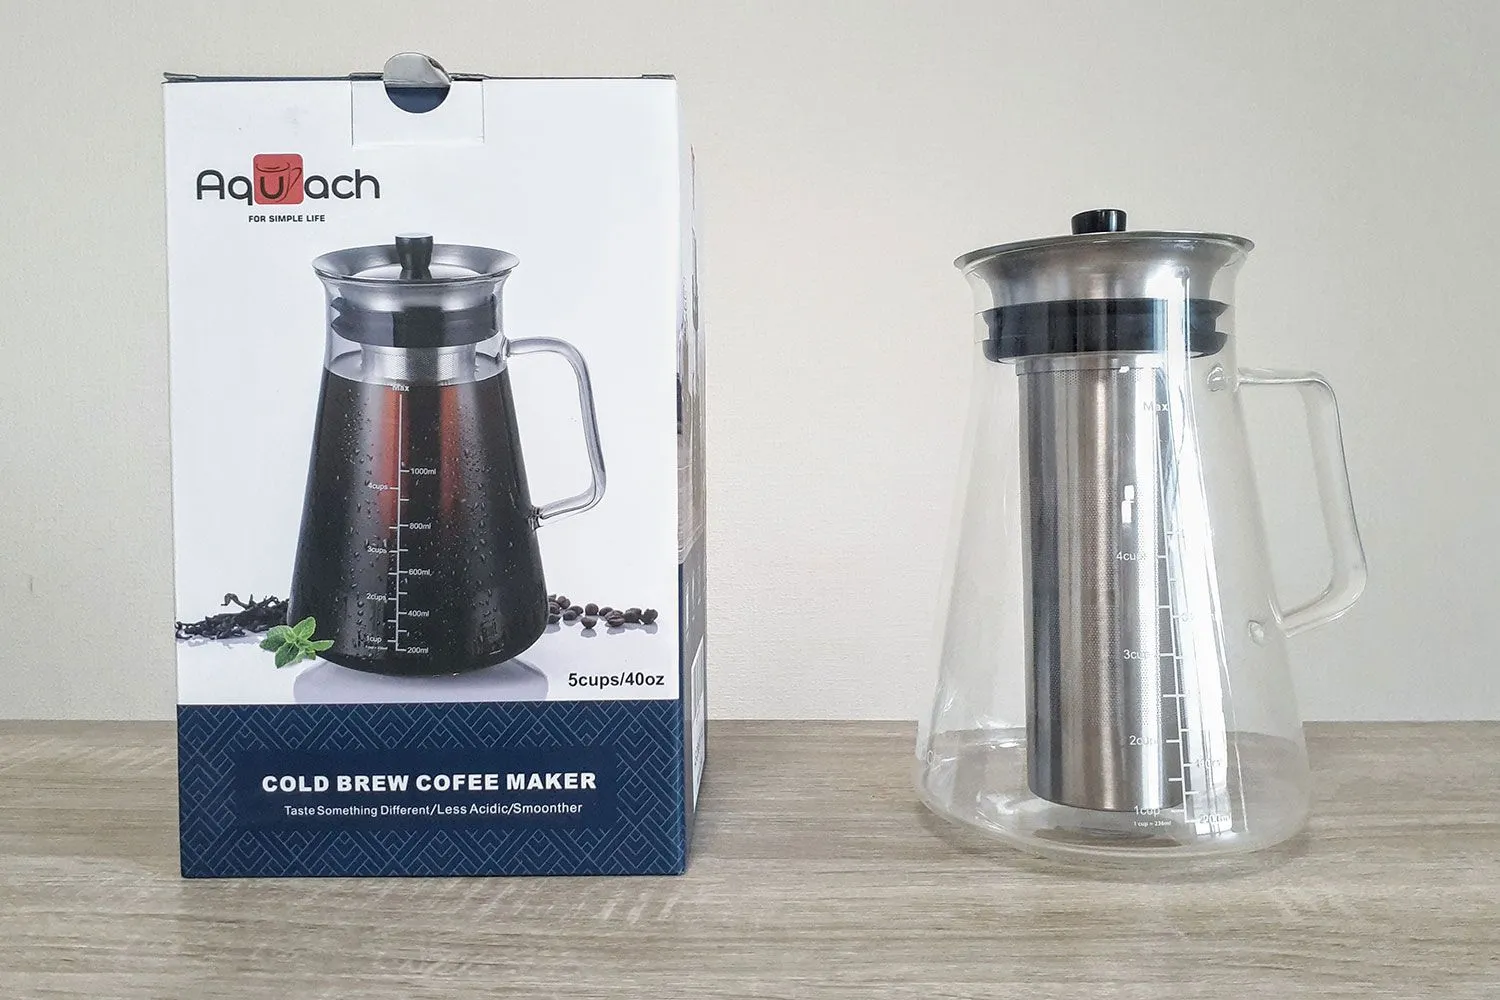 https://cdn.healthykitchen101.com/reviews/images/coffee-makers/cl5qeyj9a004ly988cbe2dkwh.jpg